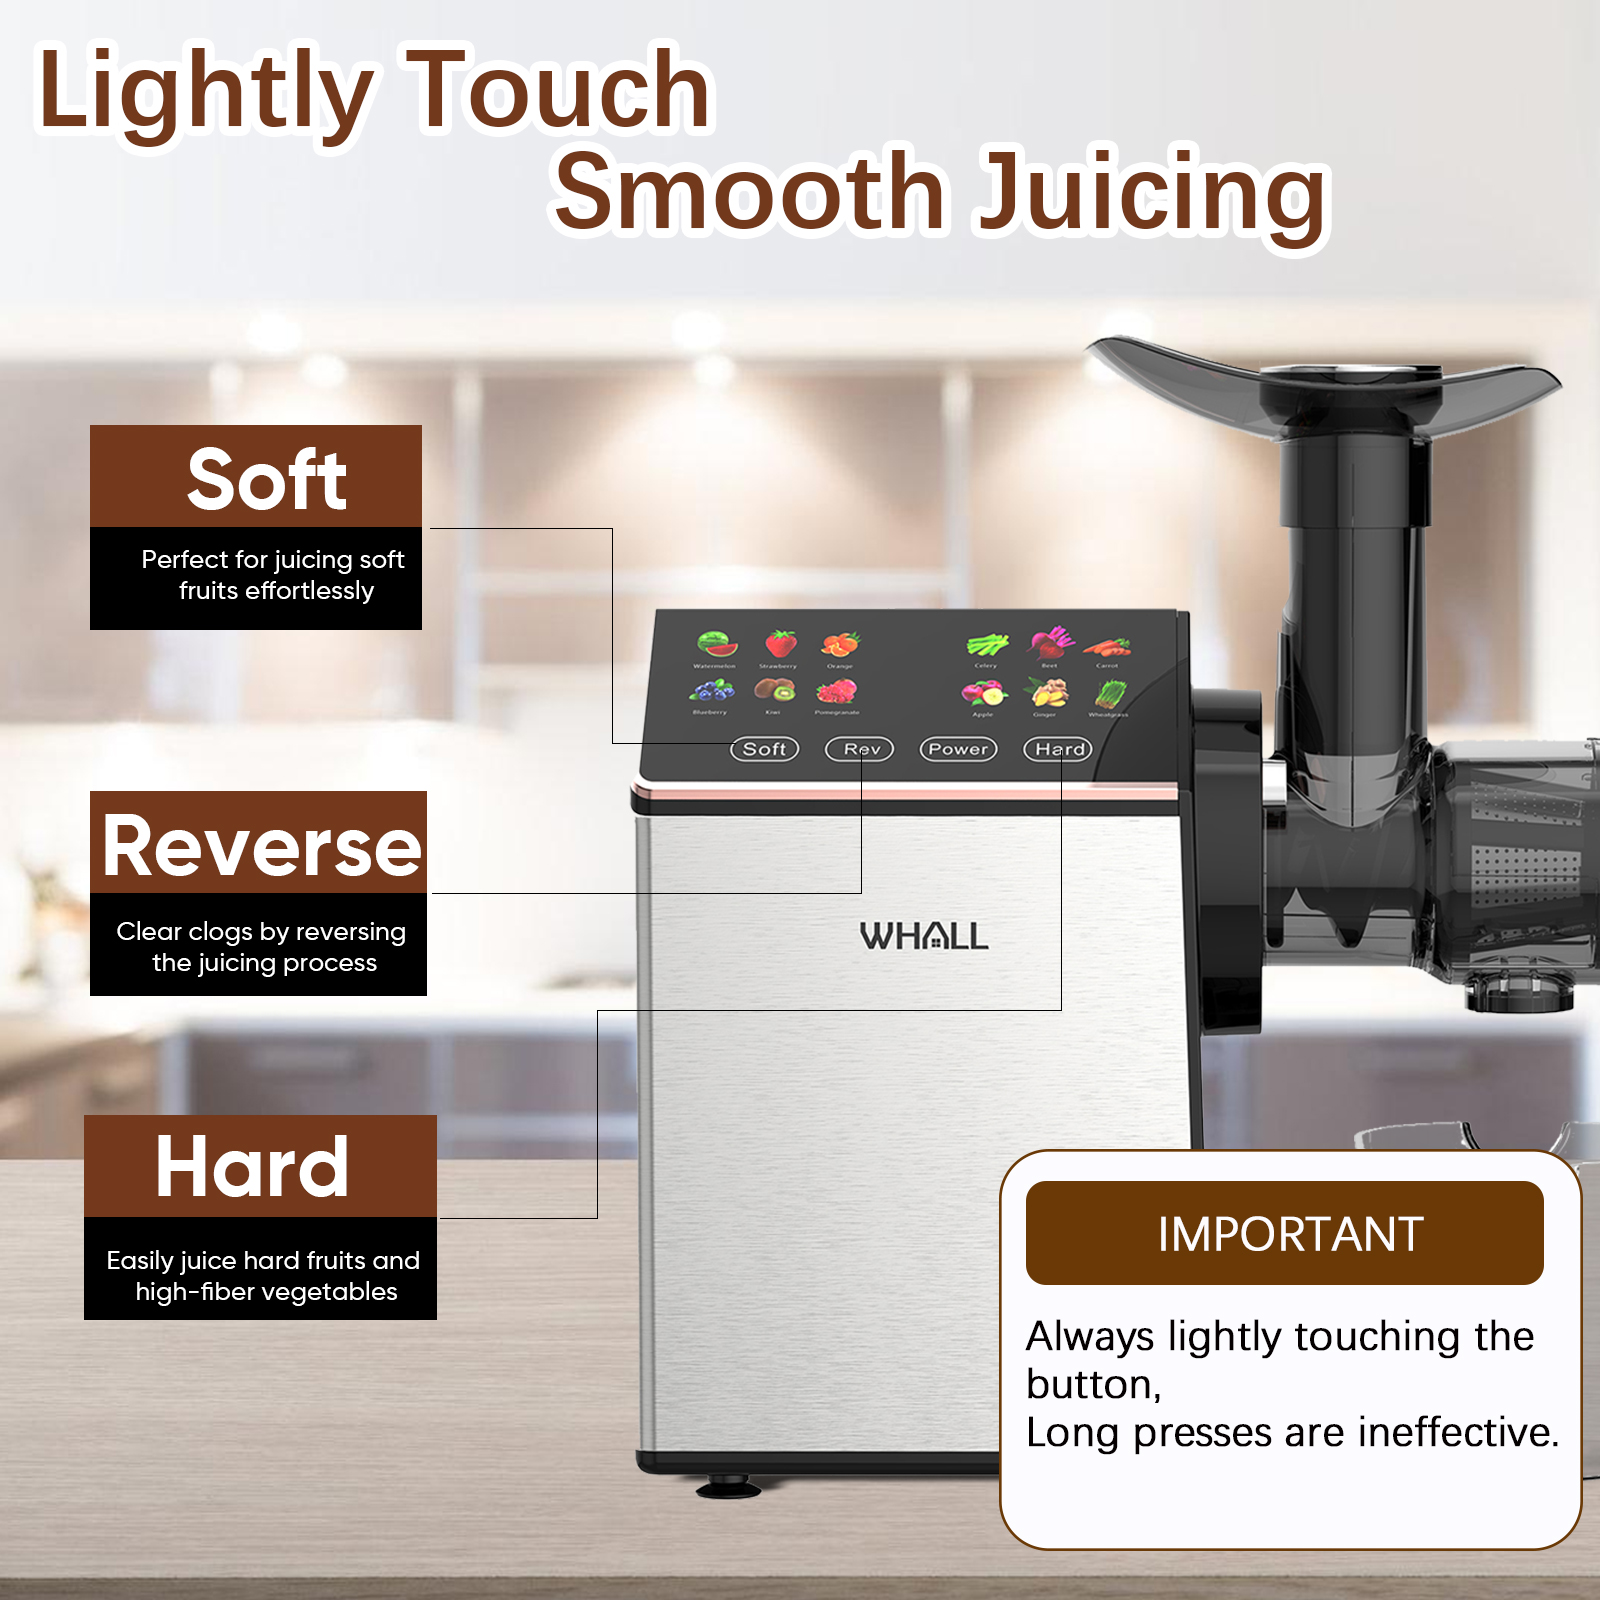 WHALL® Slow Masticating Juicer - Cold Press Juicer Machine with Touchscreen, Reverse Function, Soft & Hard Models, Quiet Motor - image 5 of 8